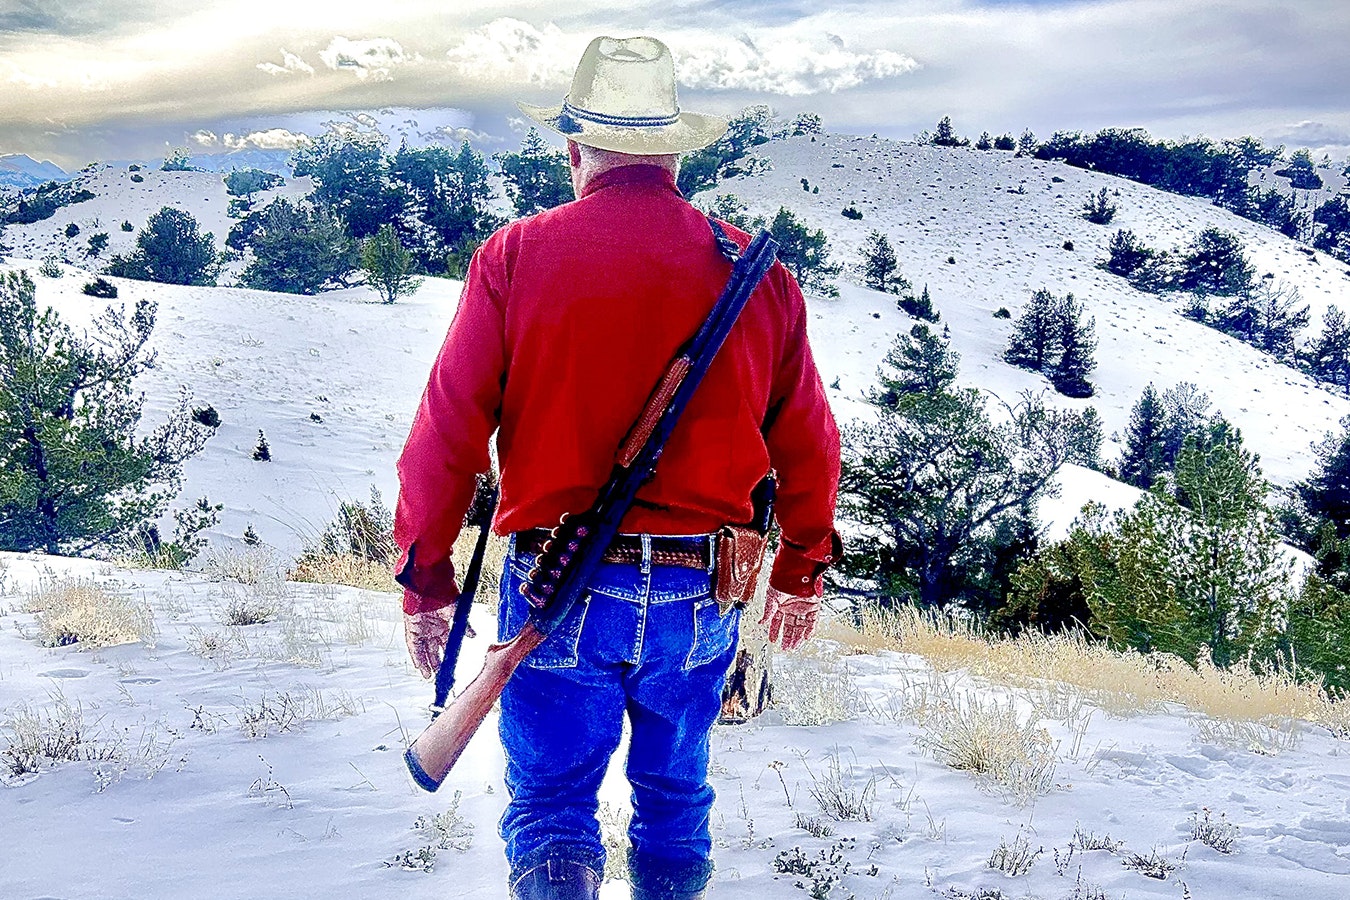 Scott Werbelow of Meeteetse has worked for 30 years as a Wyoming Game and Fish Department game warden, and is sharing his experiences as the son of an unapologetic poacher.